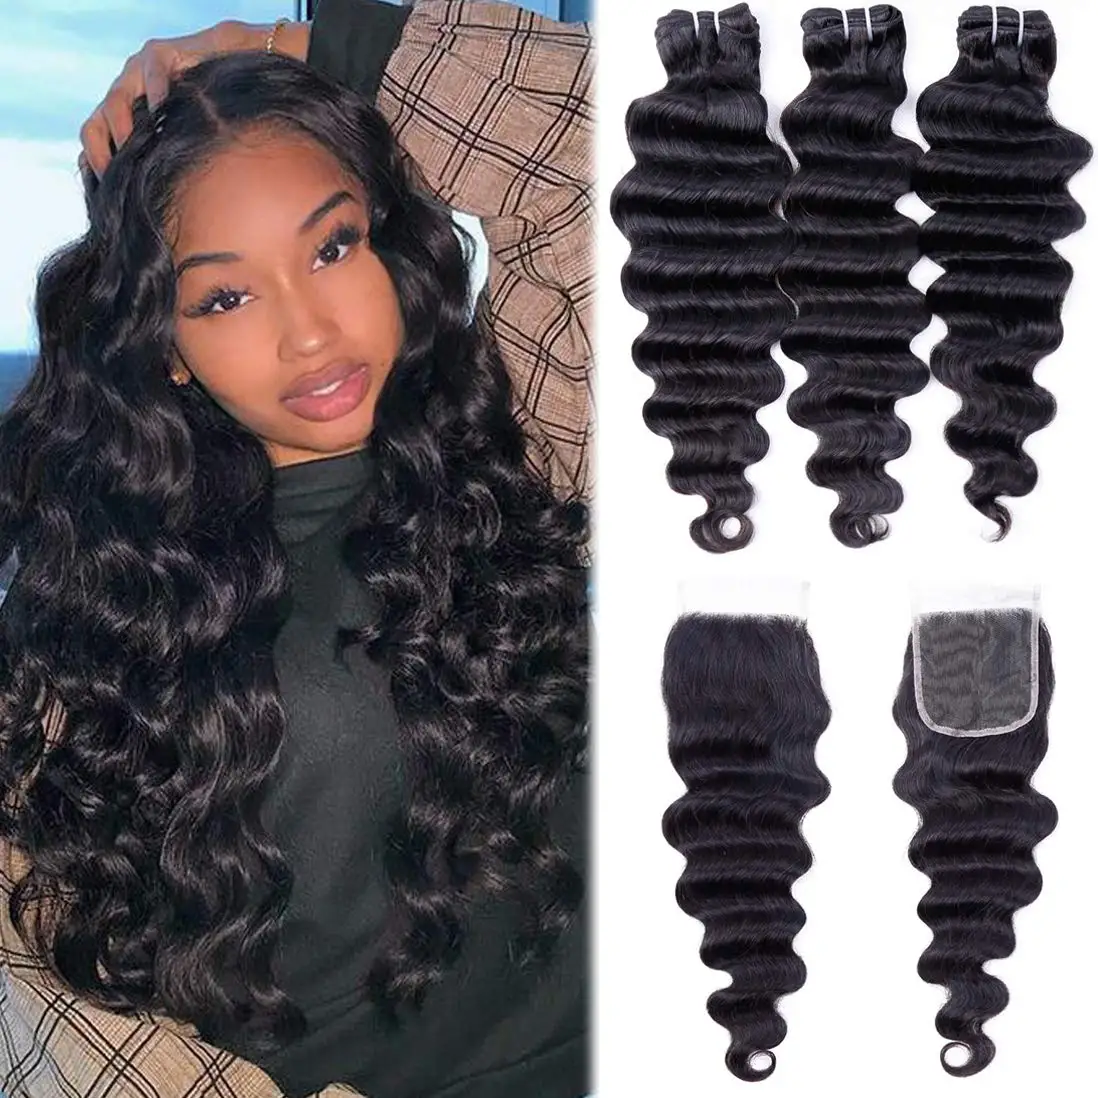 

Vendors 4x4 5x5 Loose Wave One Single Donor Super Double Drawn Bouncy Short Ombre 100% Raw Remy Indian Hair Bundles with Closure, 1b / #2 / #4 / 613 blonde / obmre